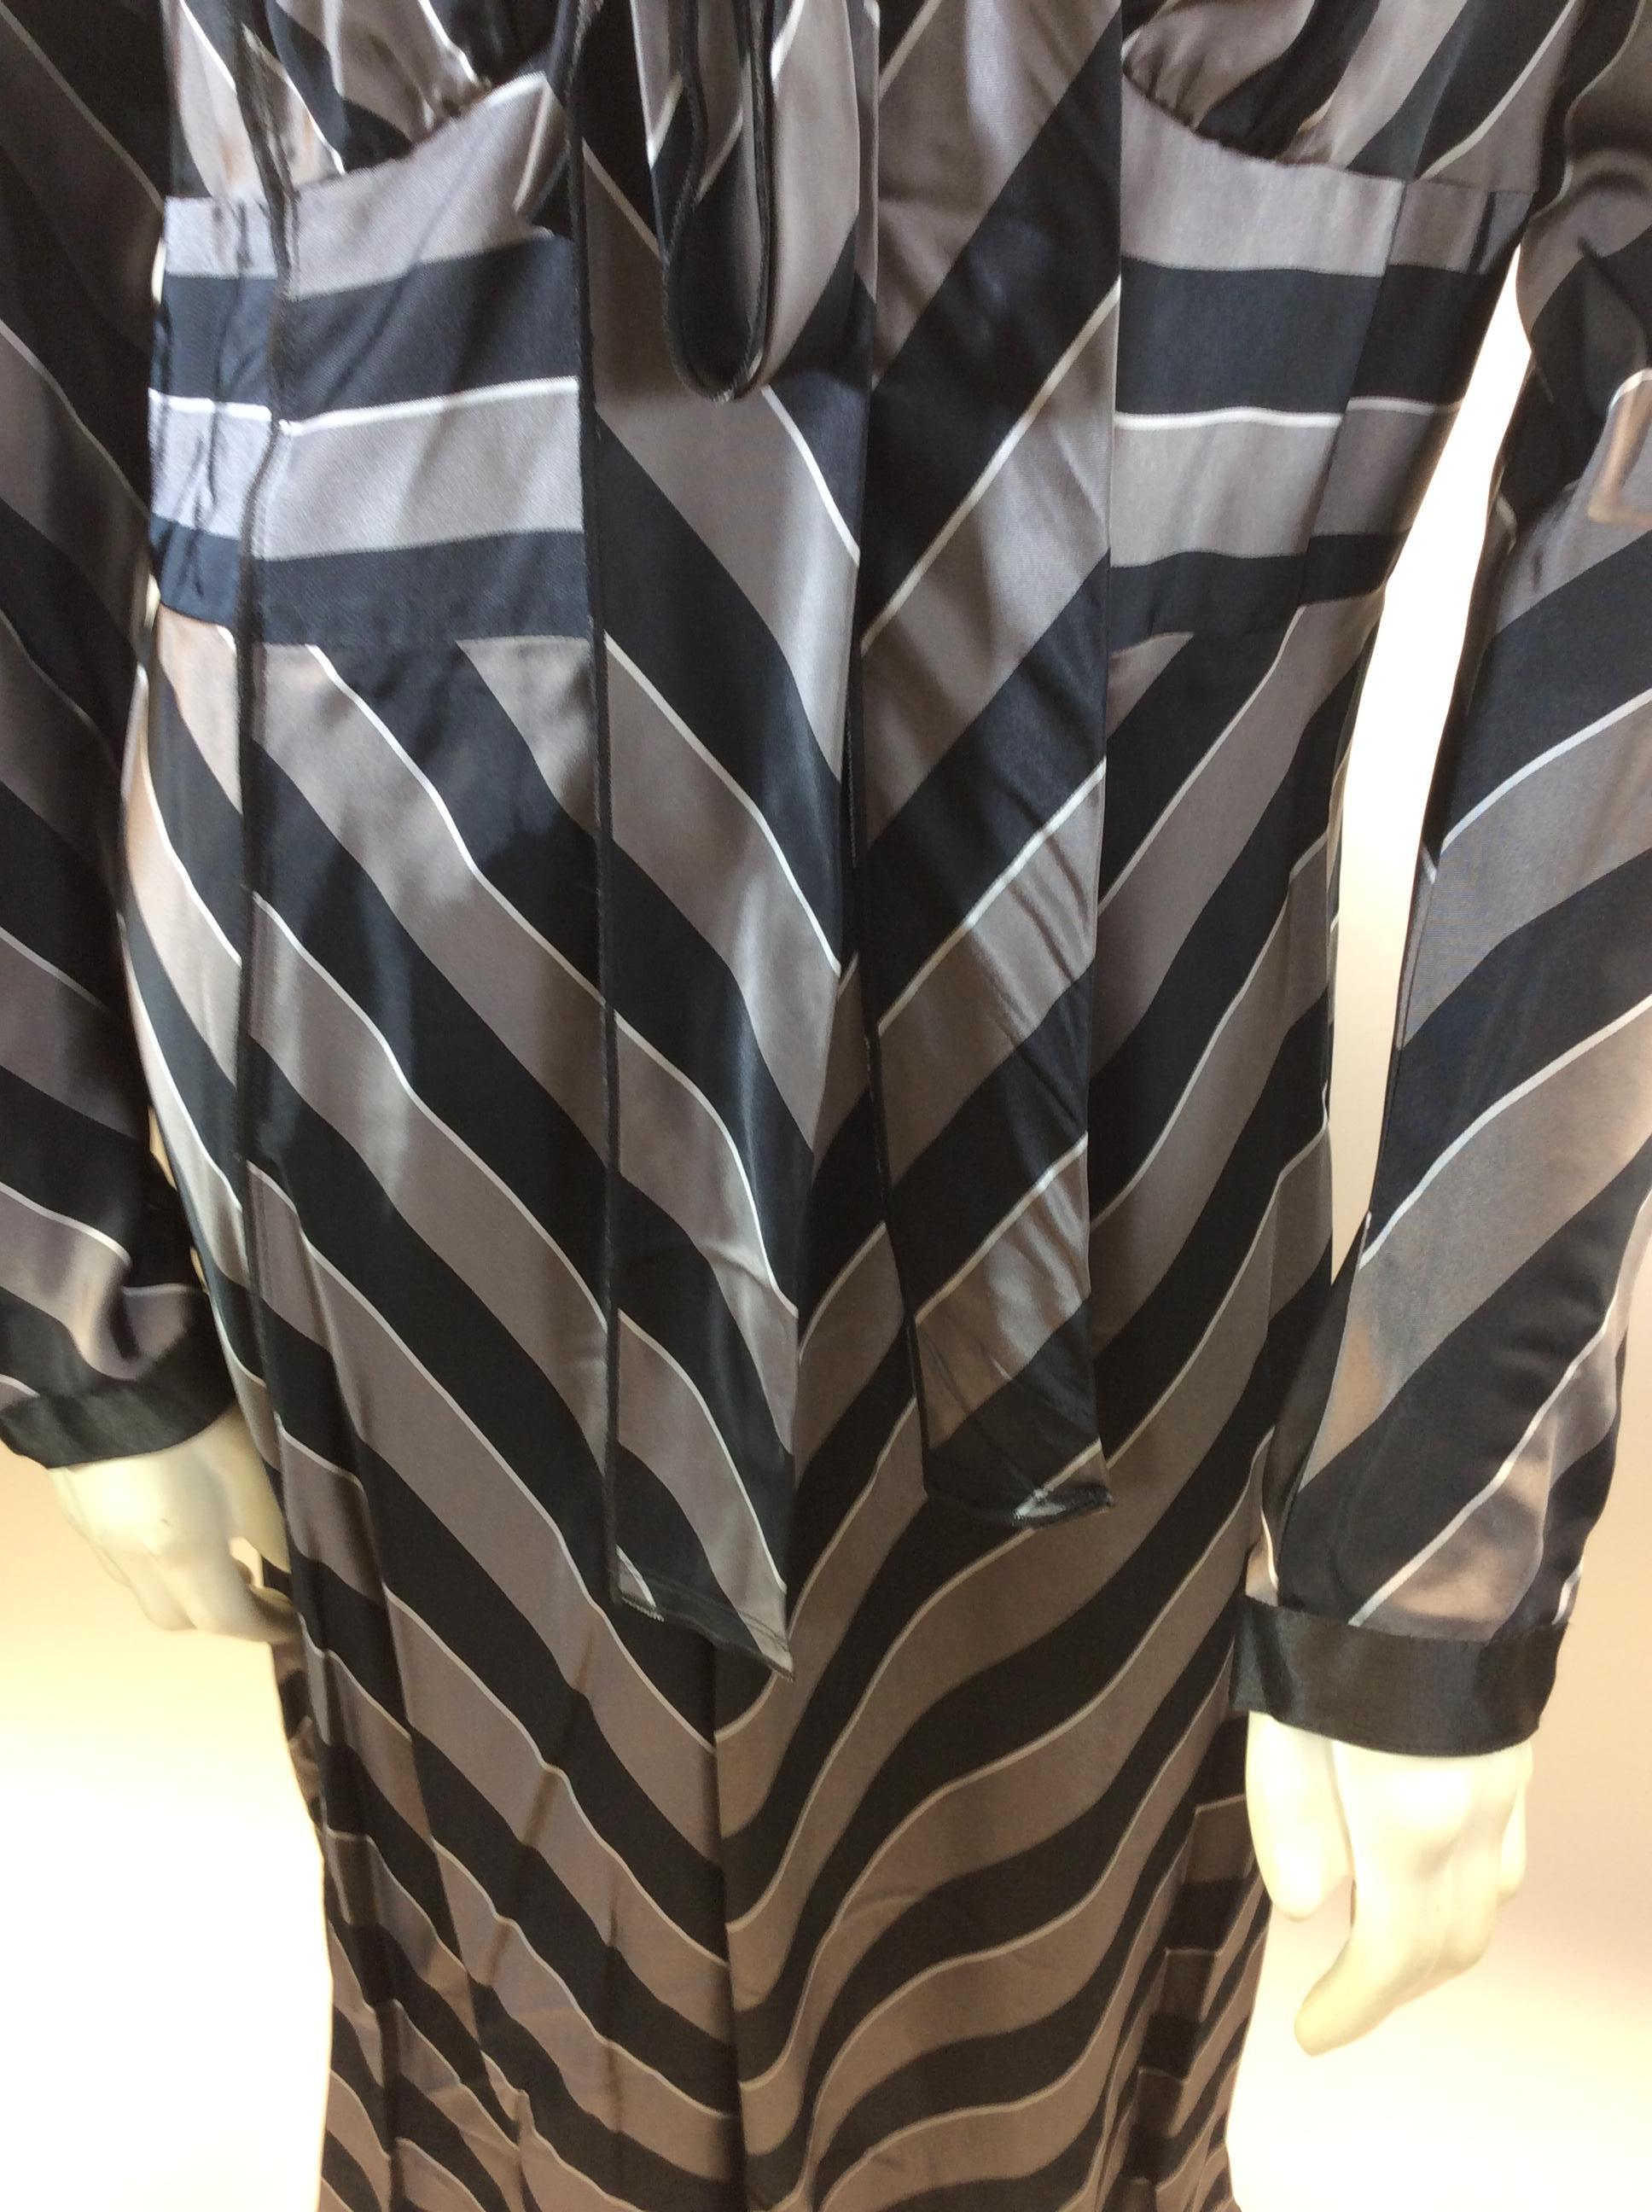 Marc Jacobs Black and Grey Stripe Dress NWT For Sale 3